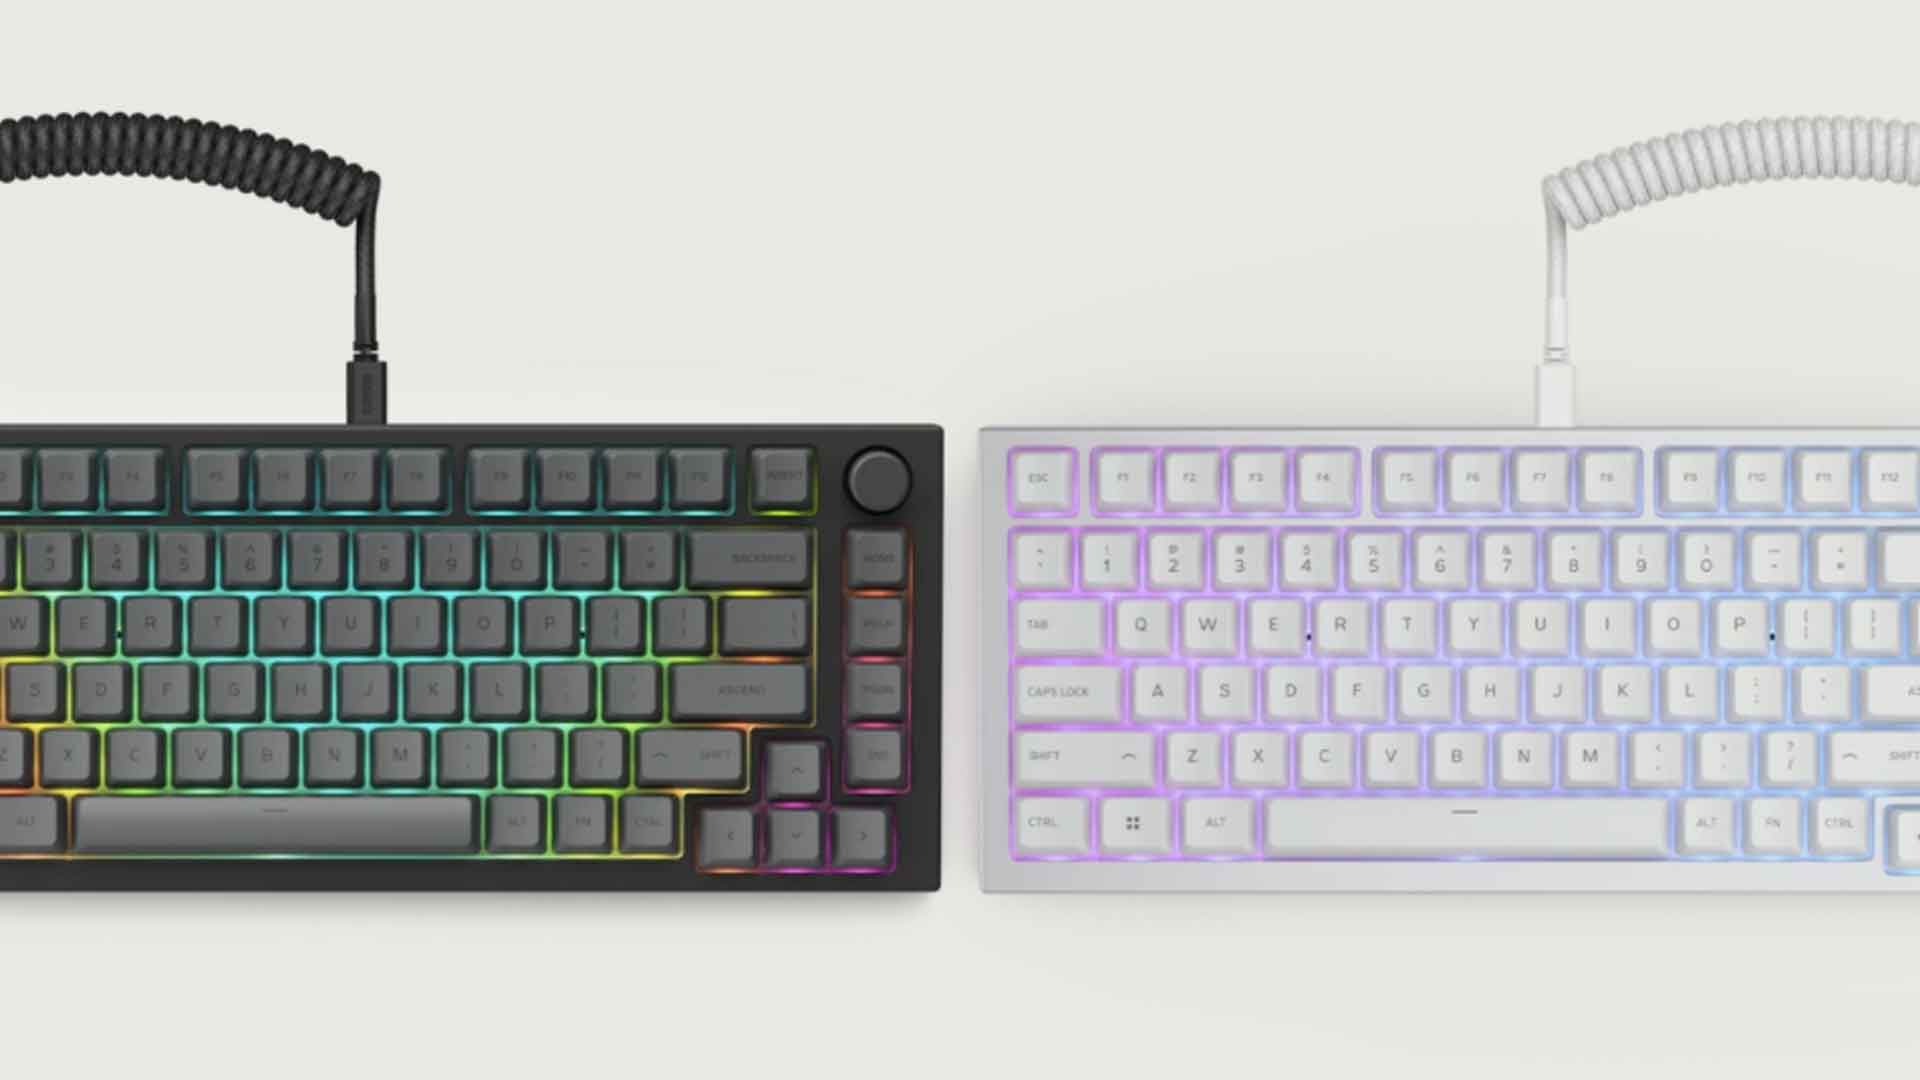 GMMK Pro Review: The New Standard For Mechanical Keyboards?